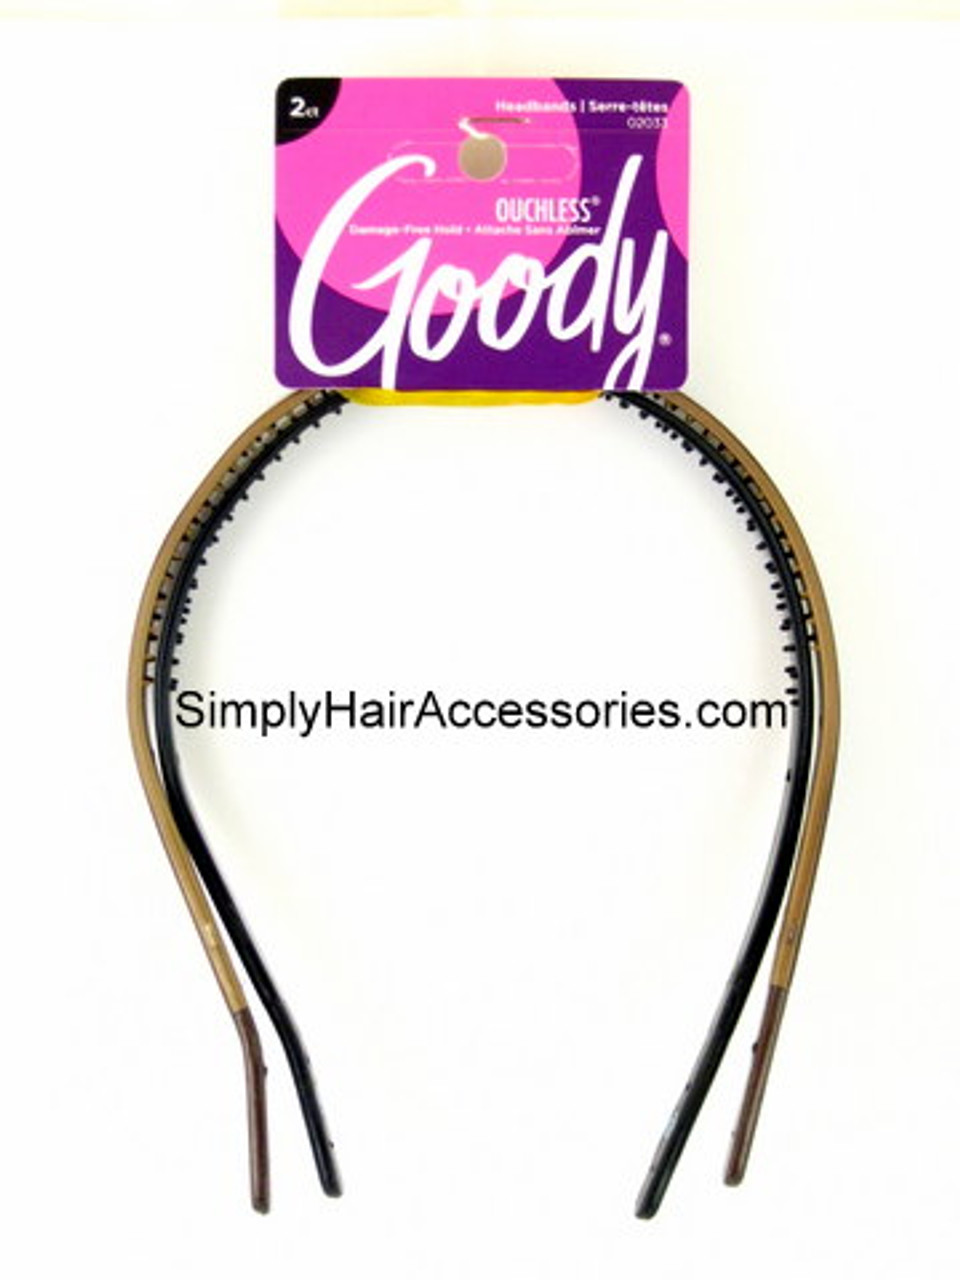 Goody Ouchless Adult Thin Flex Tip Head Band - 2 Pcs.